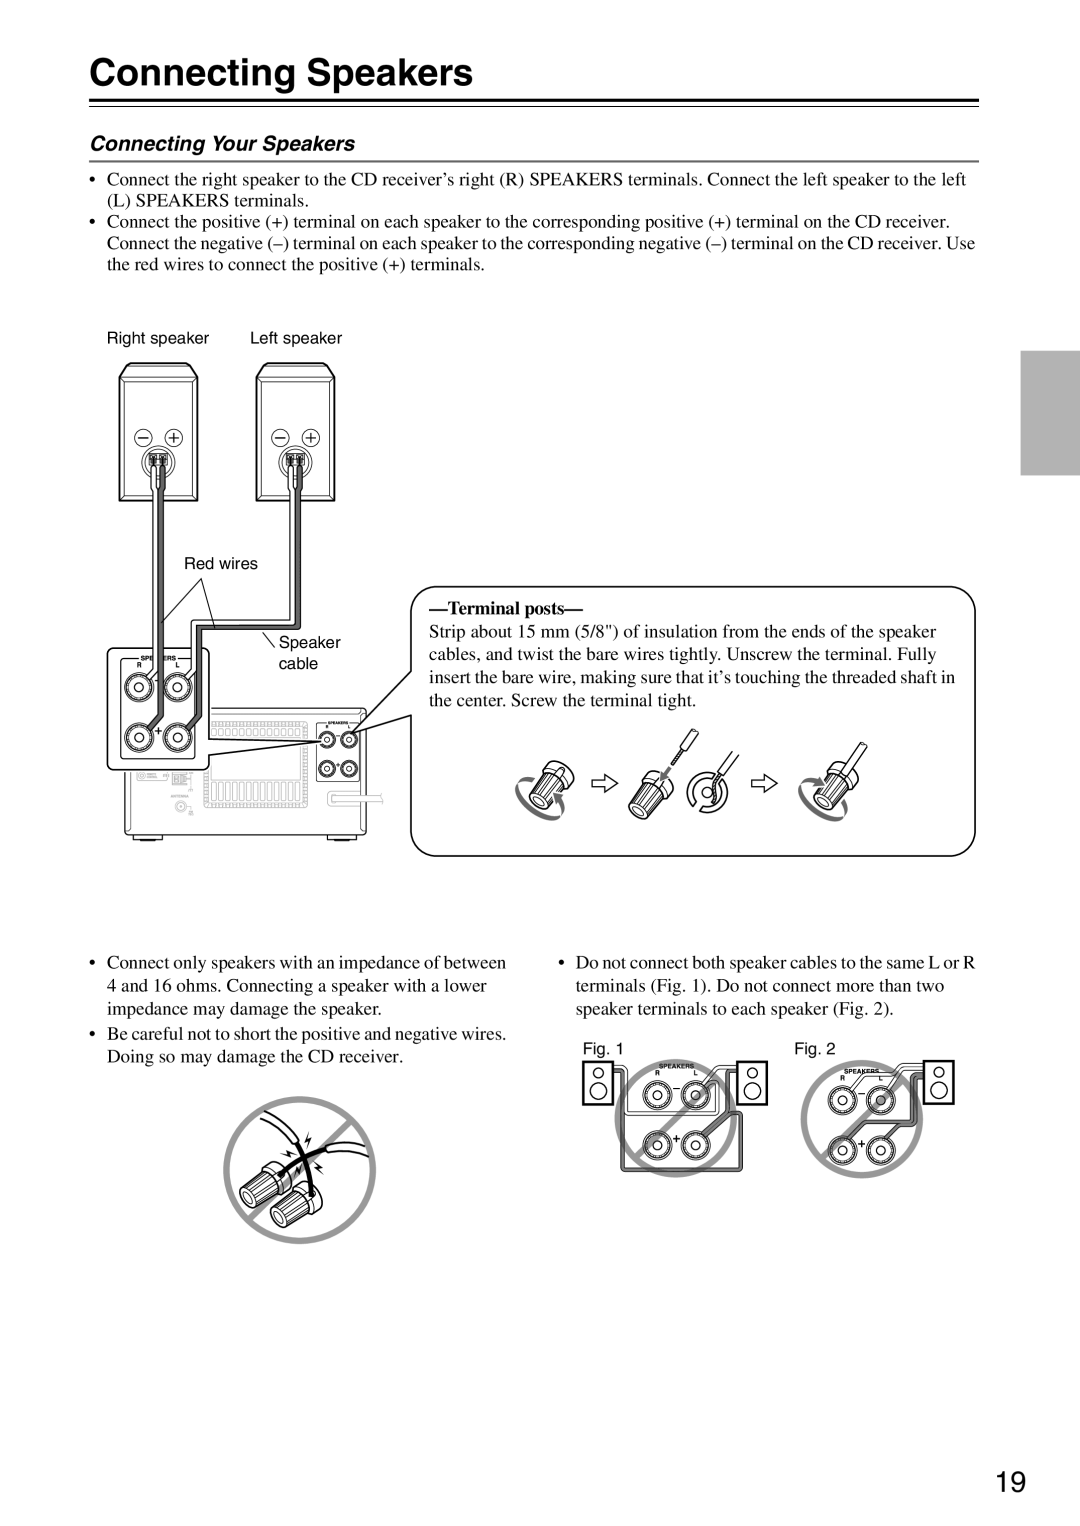 Onkyo CR-525, CR-325 instruction manual Connecting Speakers, Connecting Your Speakers, Terminalposts 